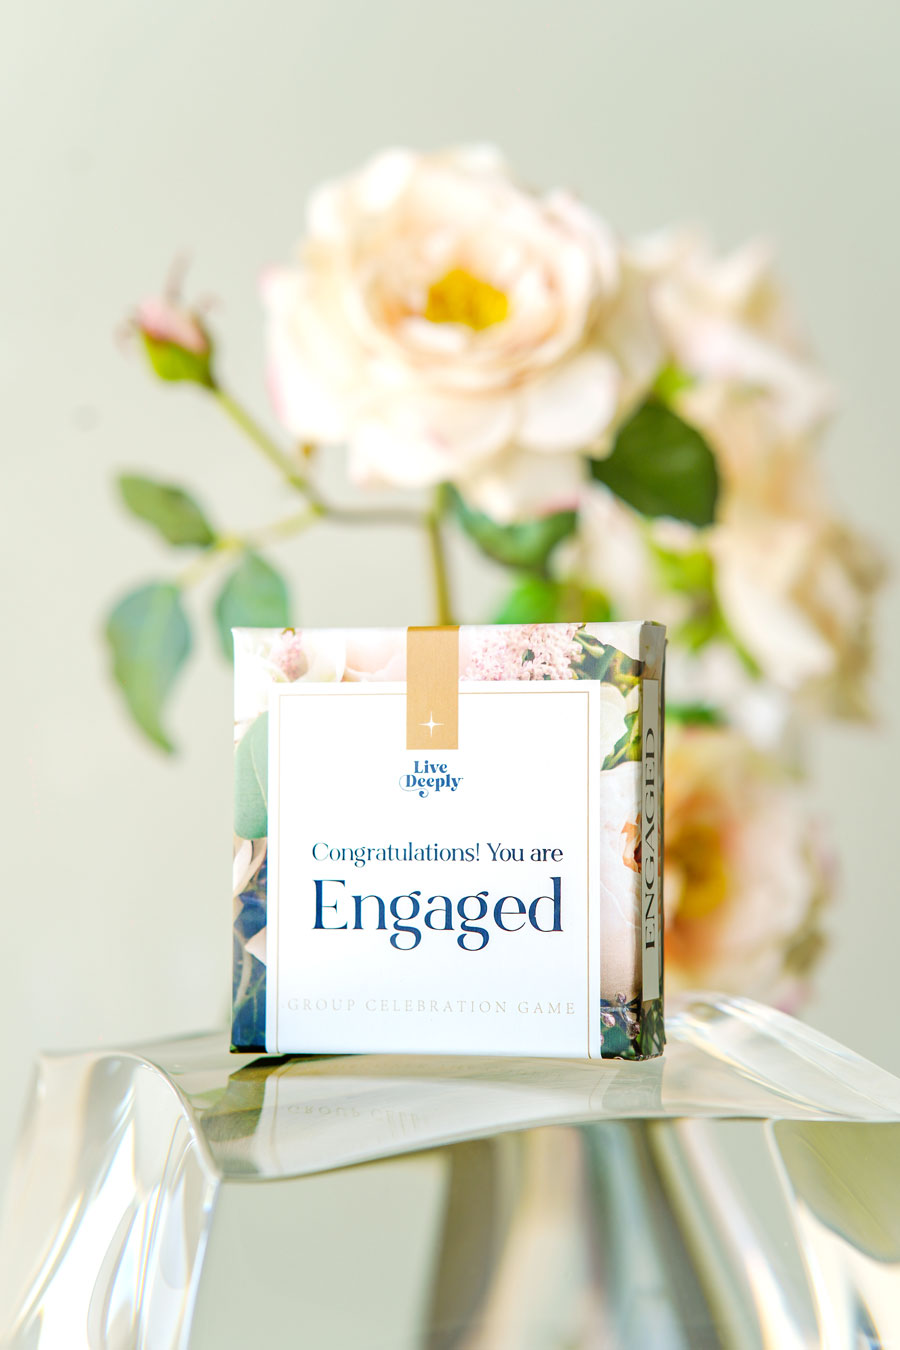 Engaged: The Conversation Card Game